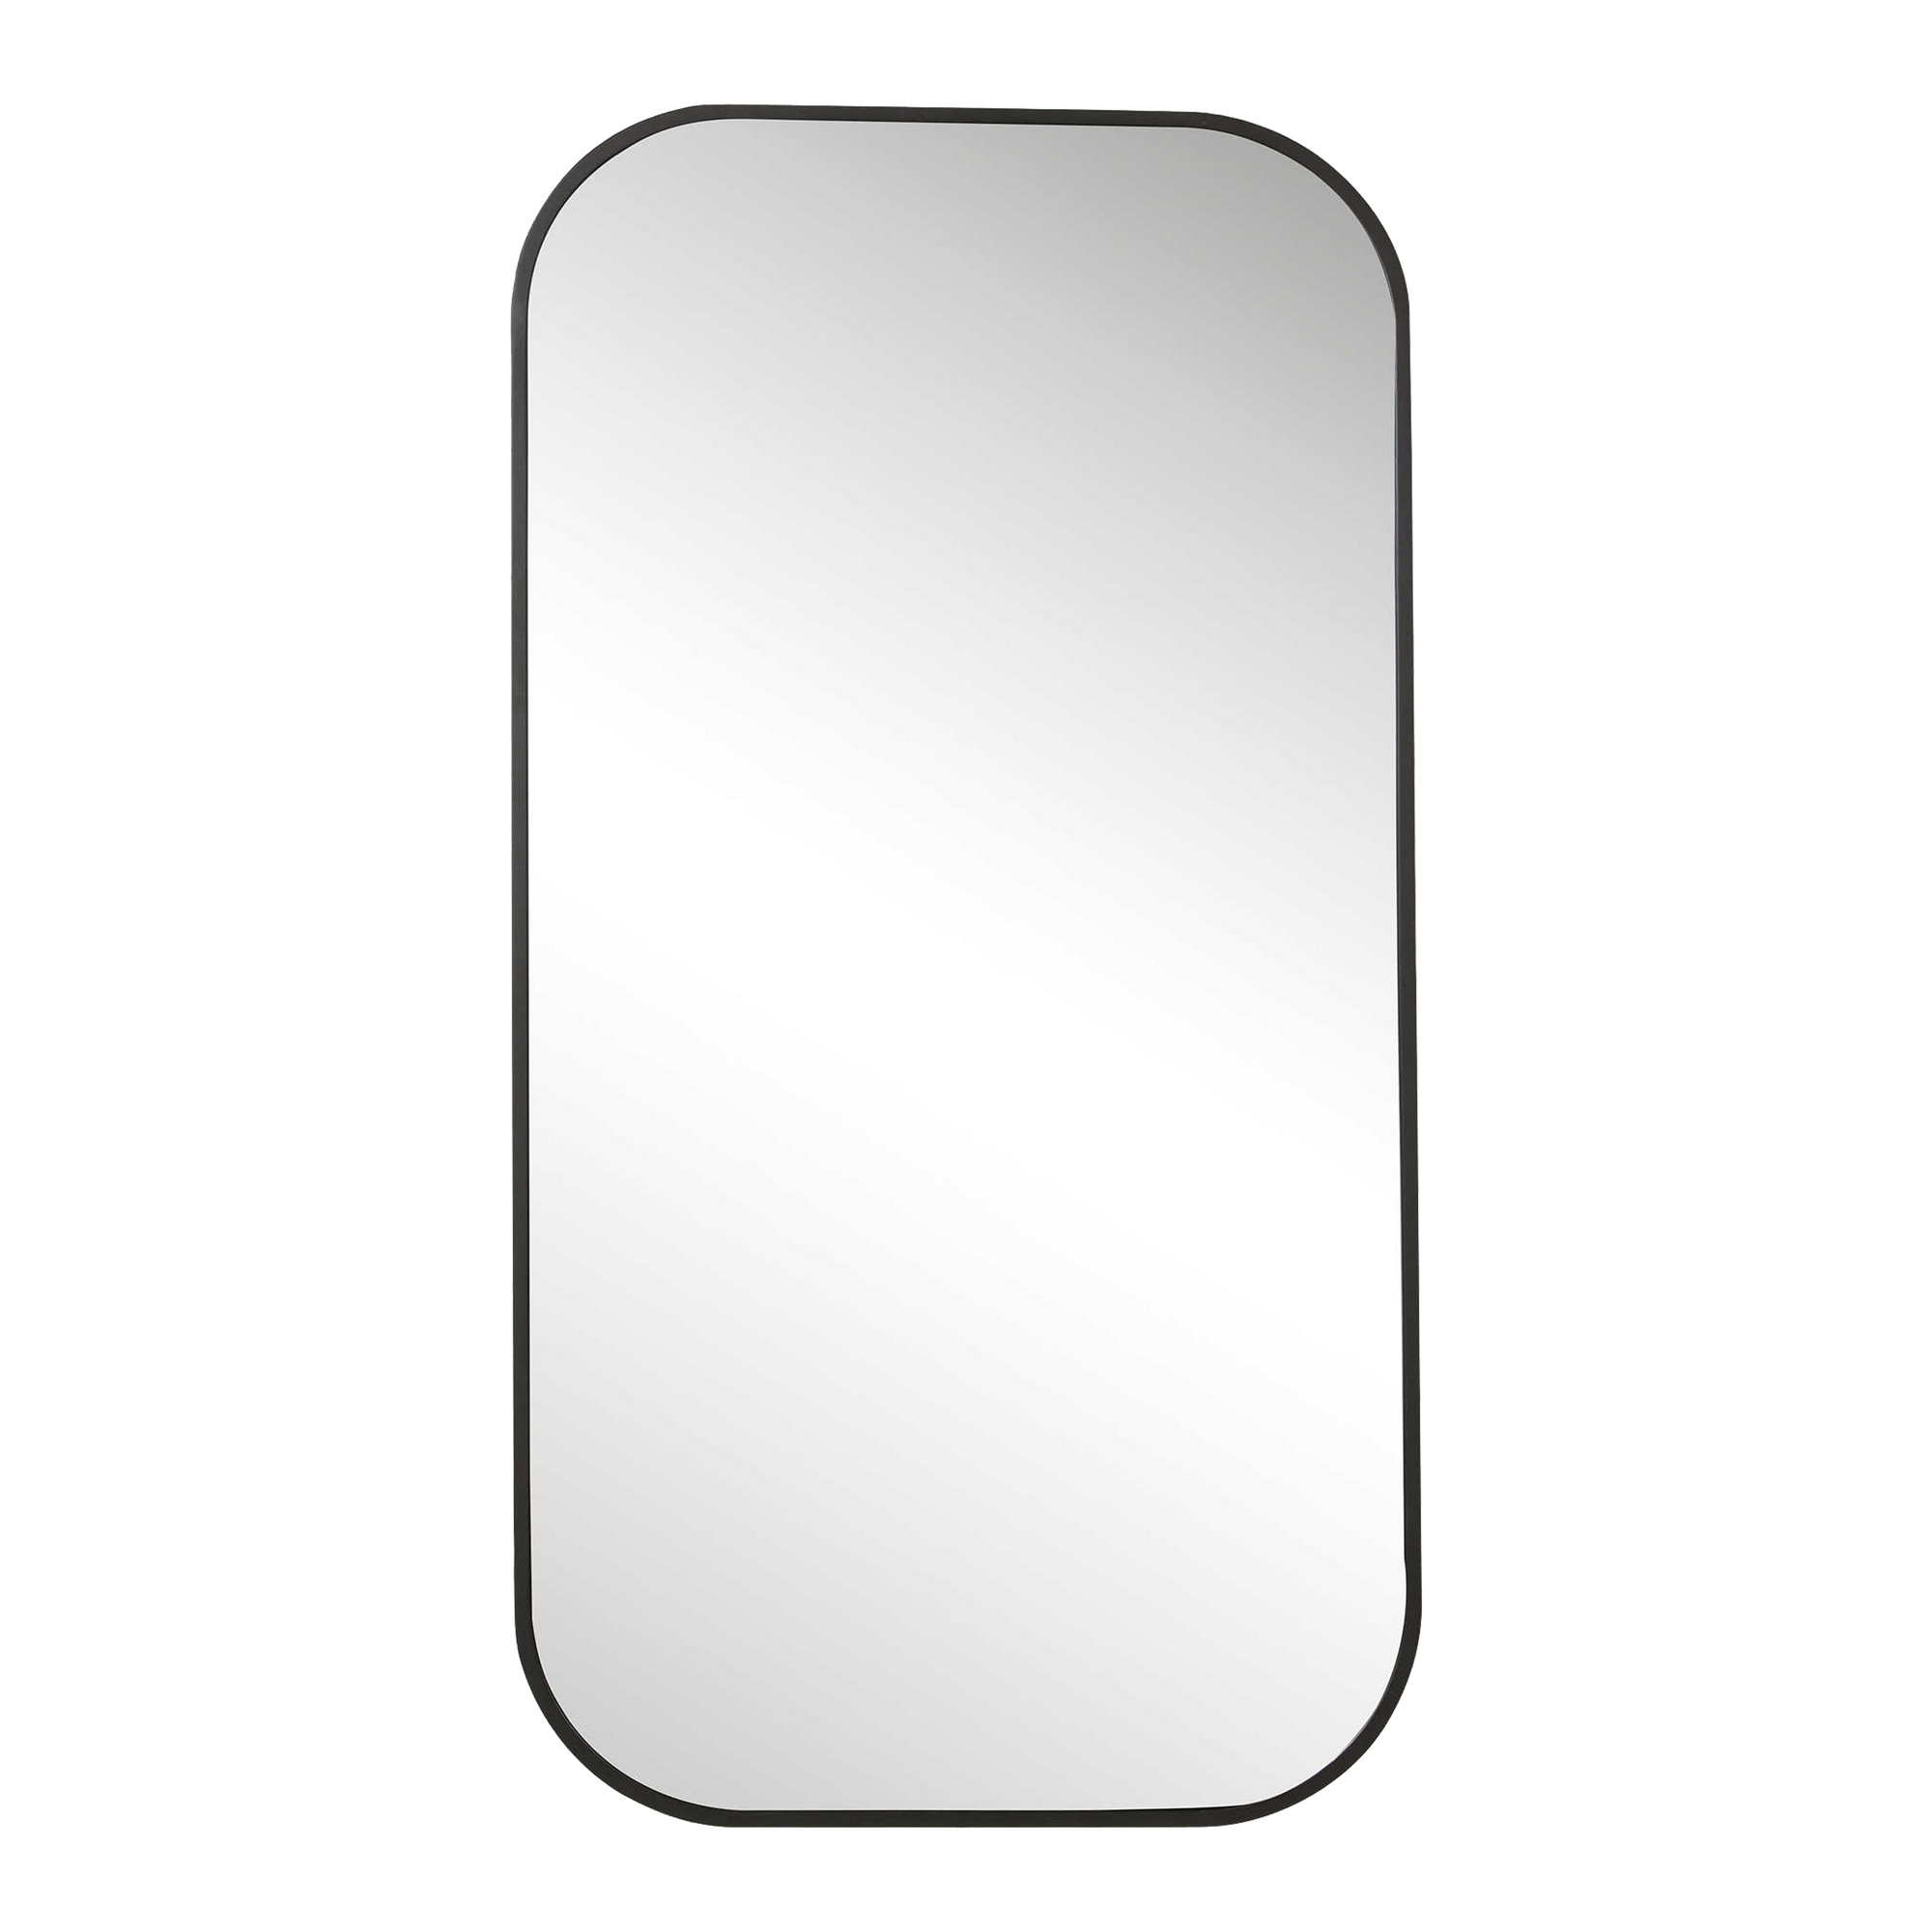 Simple yet stylish, this mirror features a classic matte black frame with a sleek, contemporary feel.